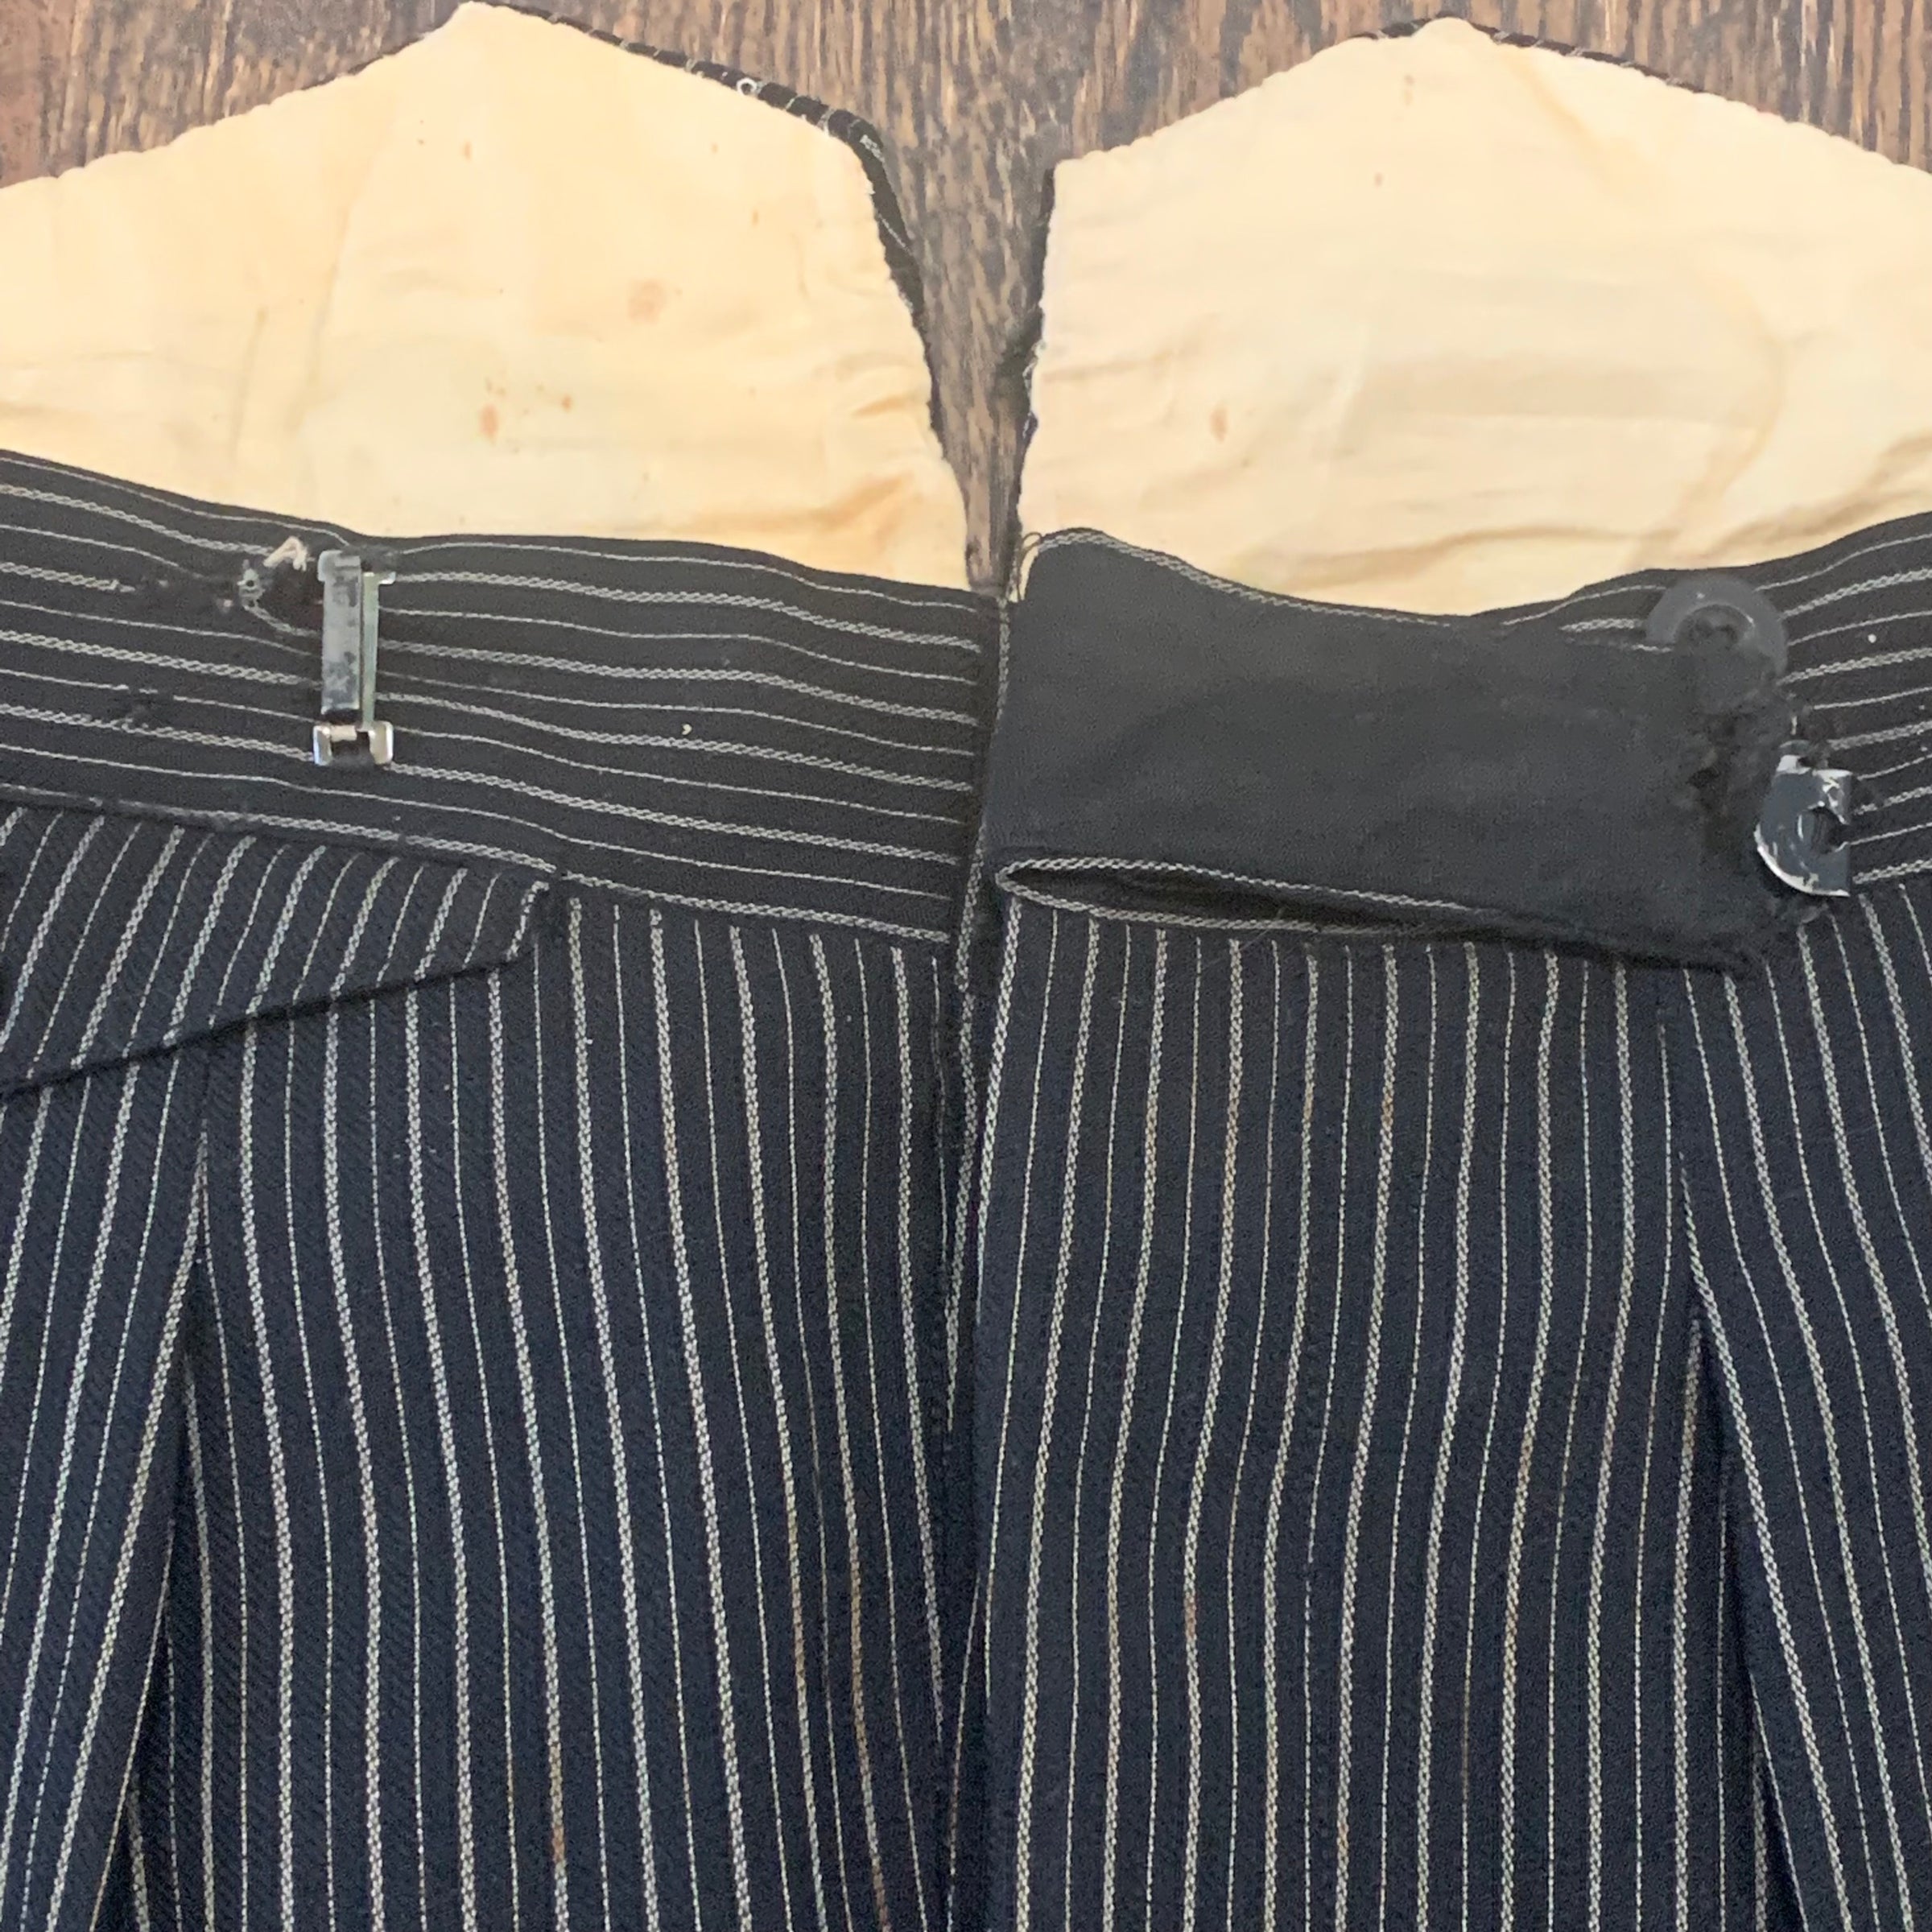 1890’s-1900’s Black and Grey Pinstriped Trousers 34" Waist